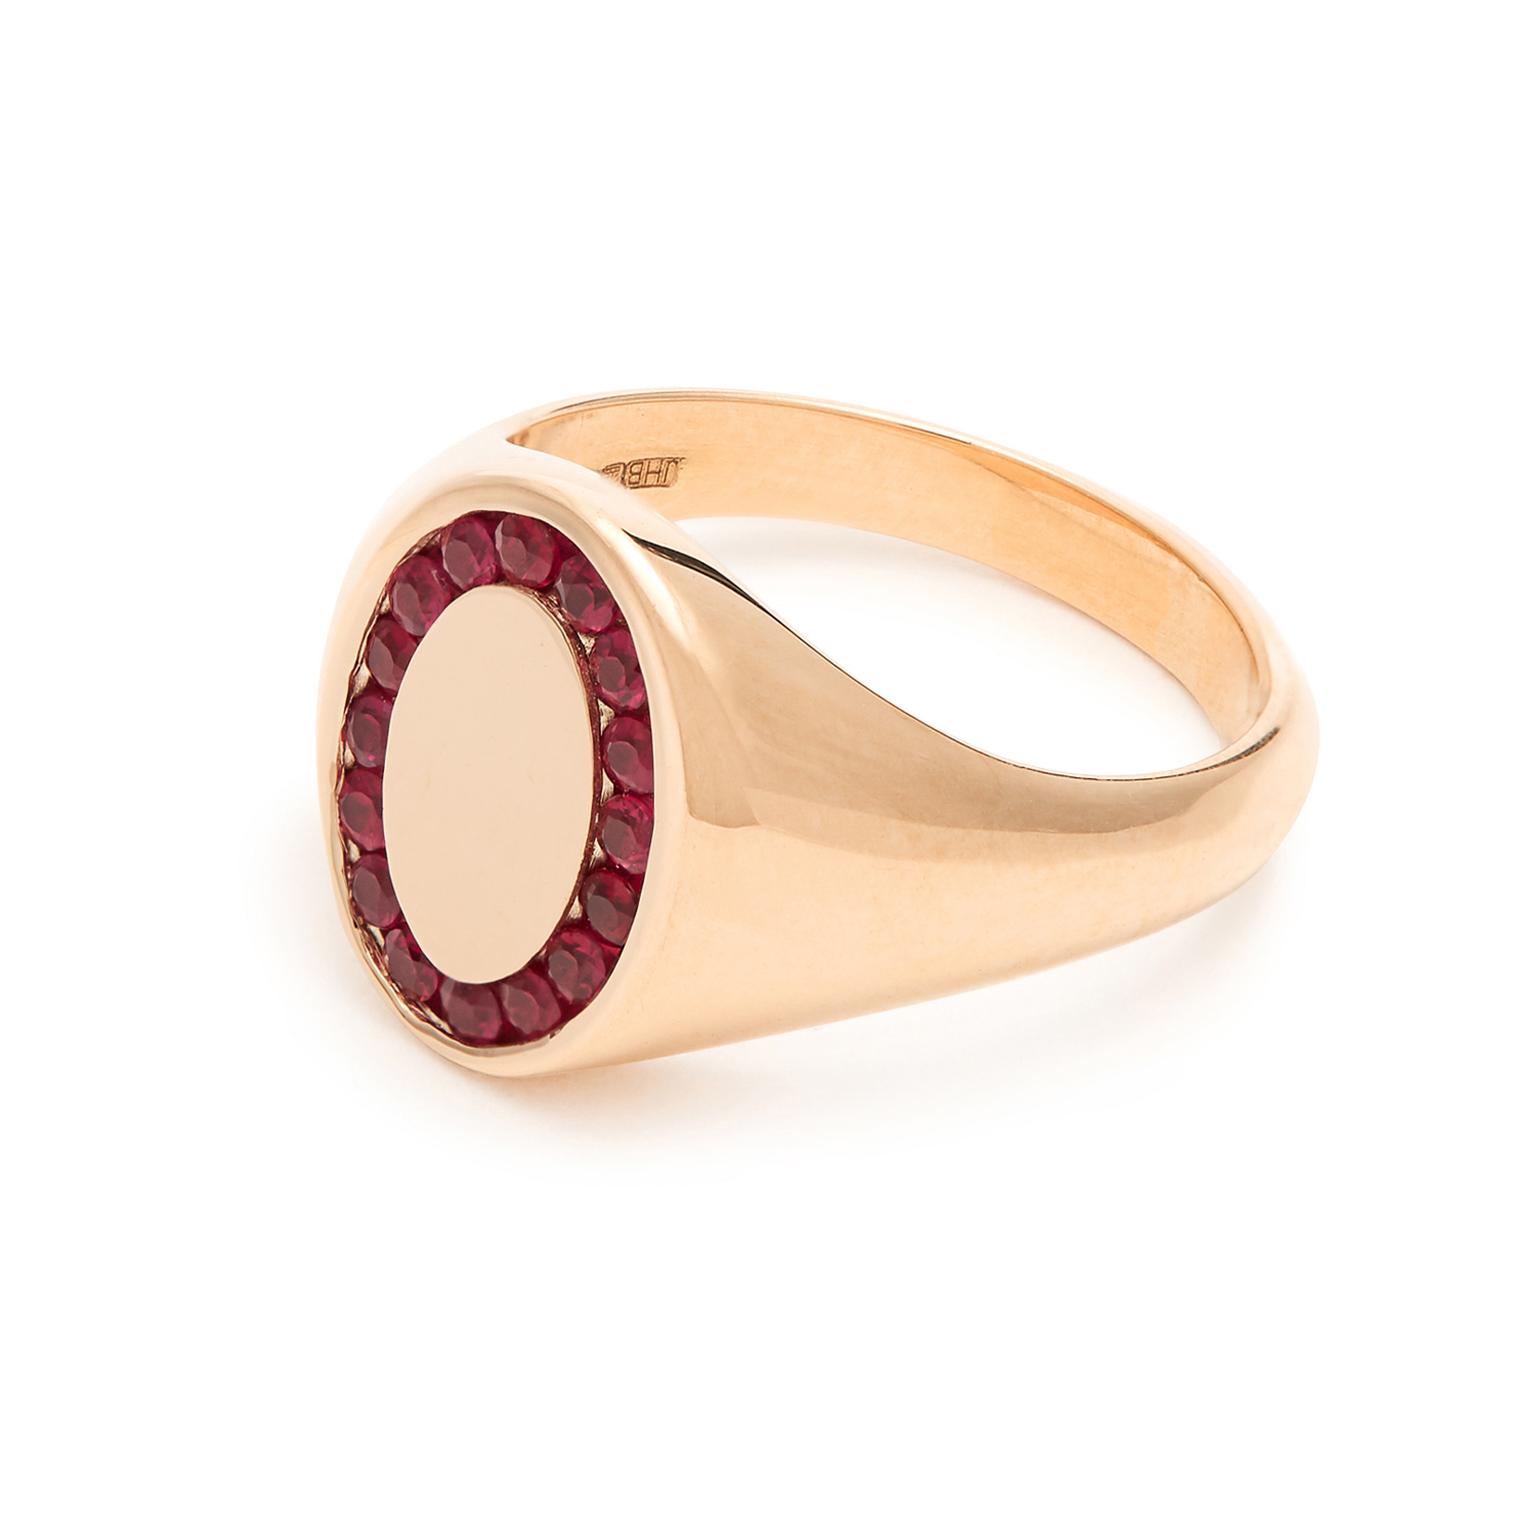 Jessica Biales Candy ruby signet ring